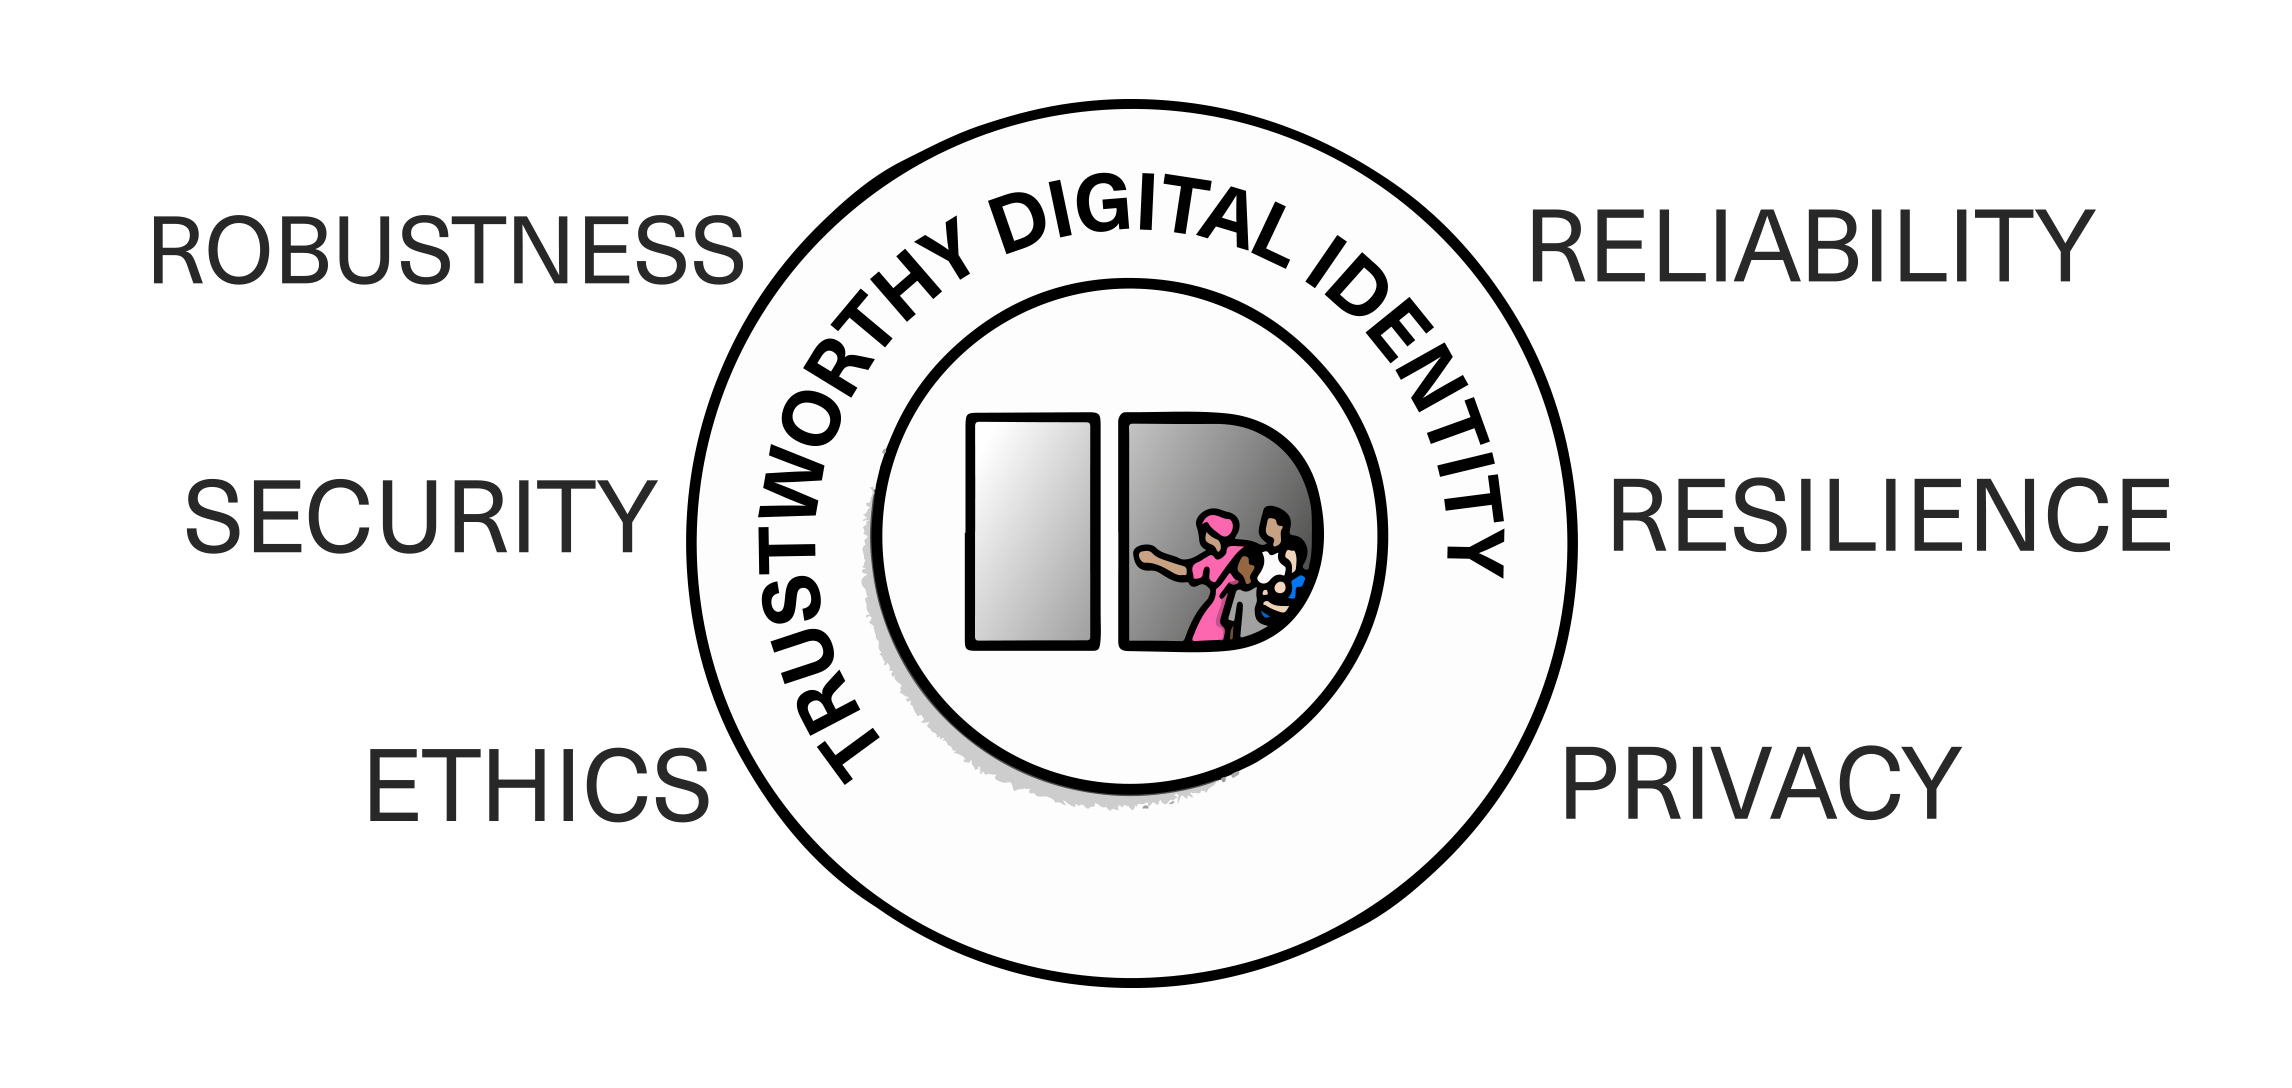 Graphic showing the text 'robustness, security, ethics, reliability, resilience, privacy'